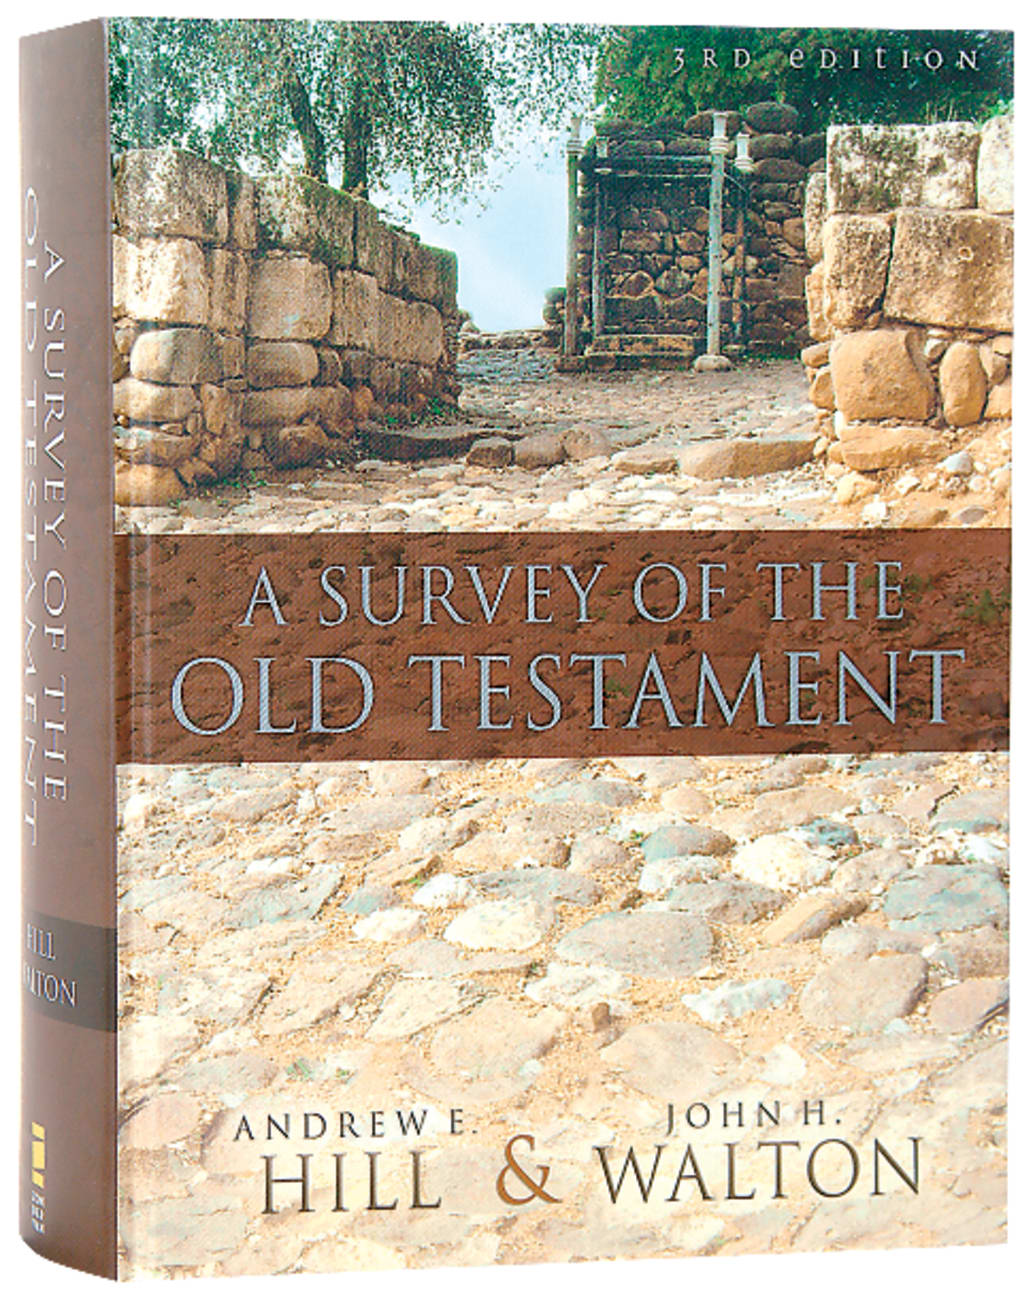 Survey of the Old Testament, a Full Colour (3rd Edition) Hardback